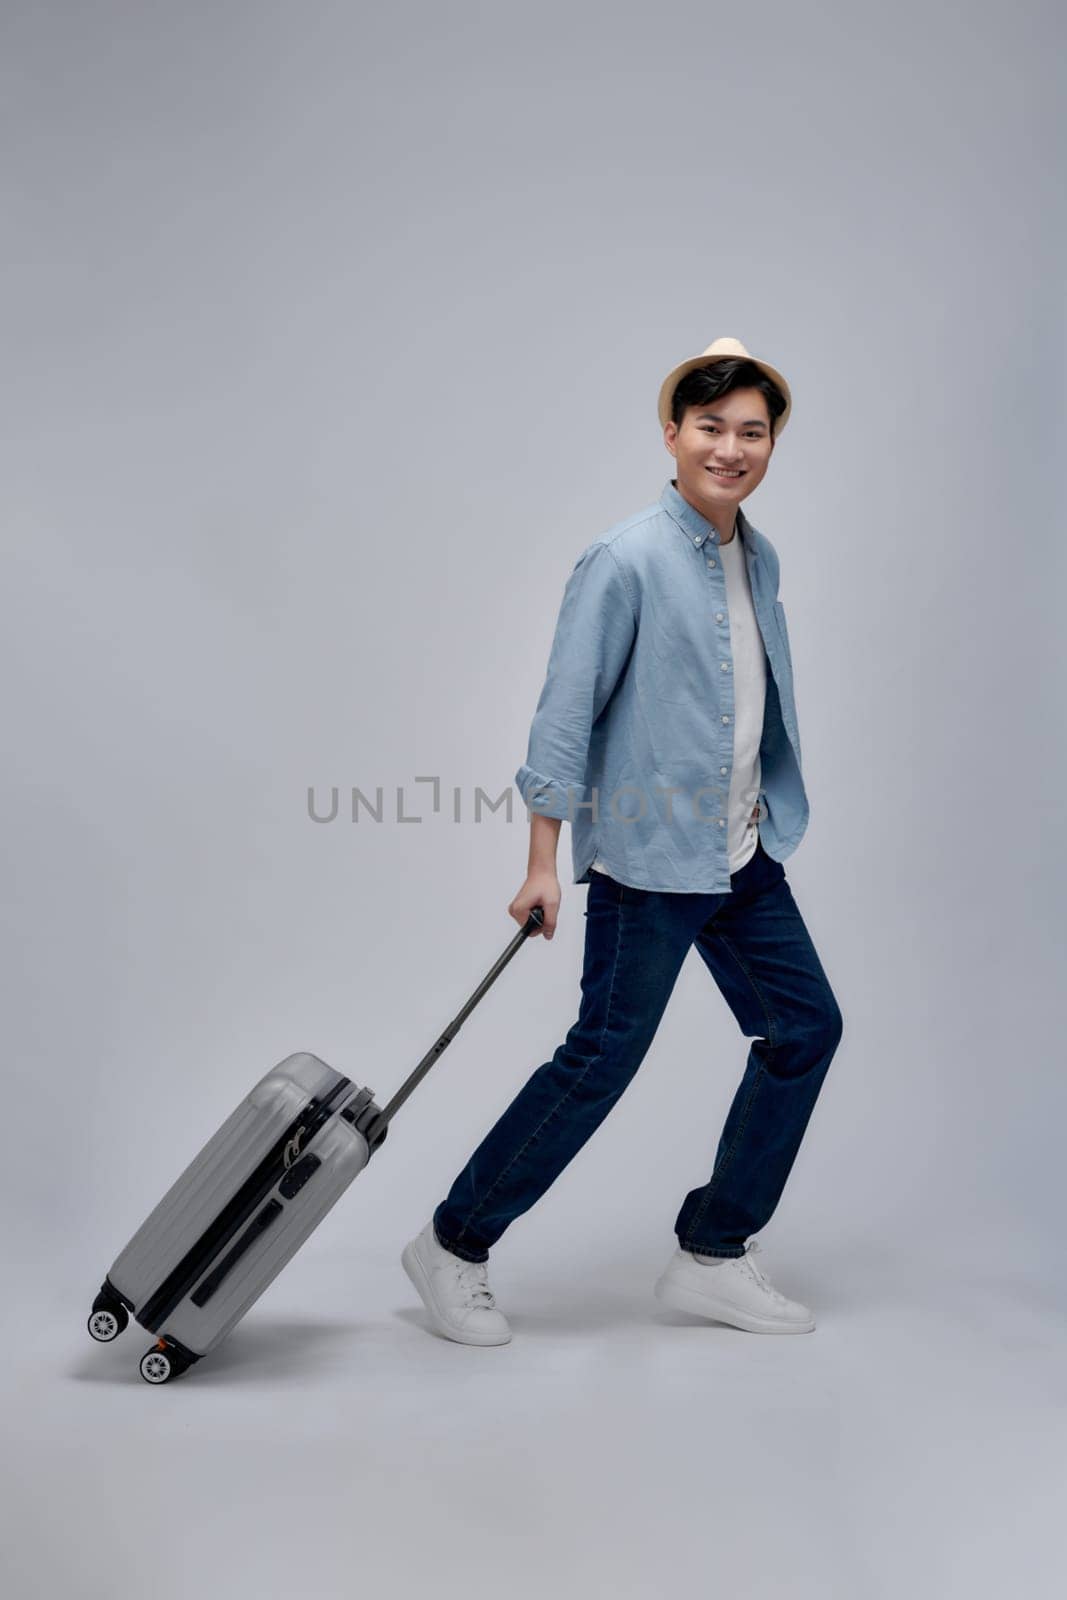 Male tourist with suitcase walking going on vacation advertising travel offer by makidotvn